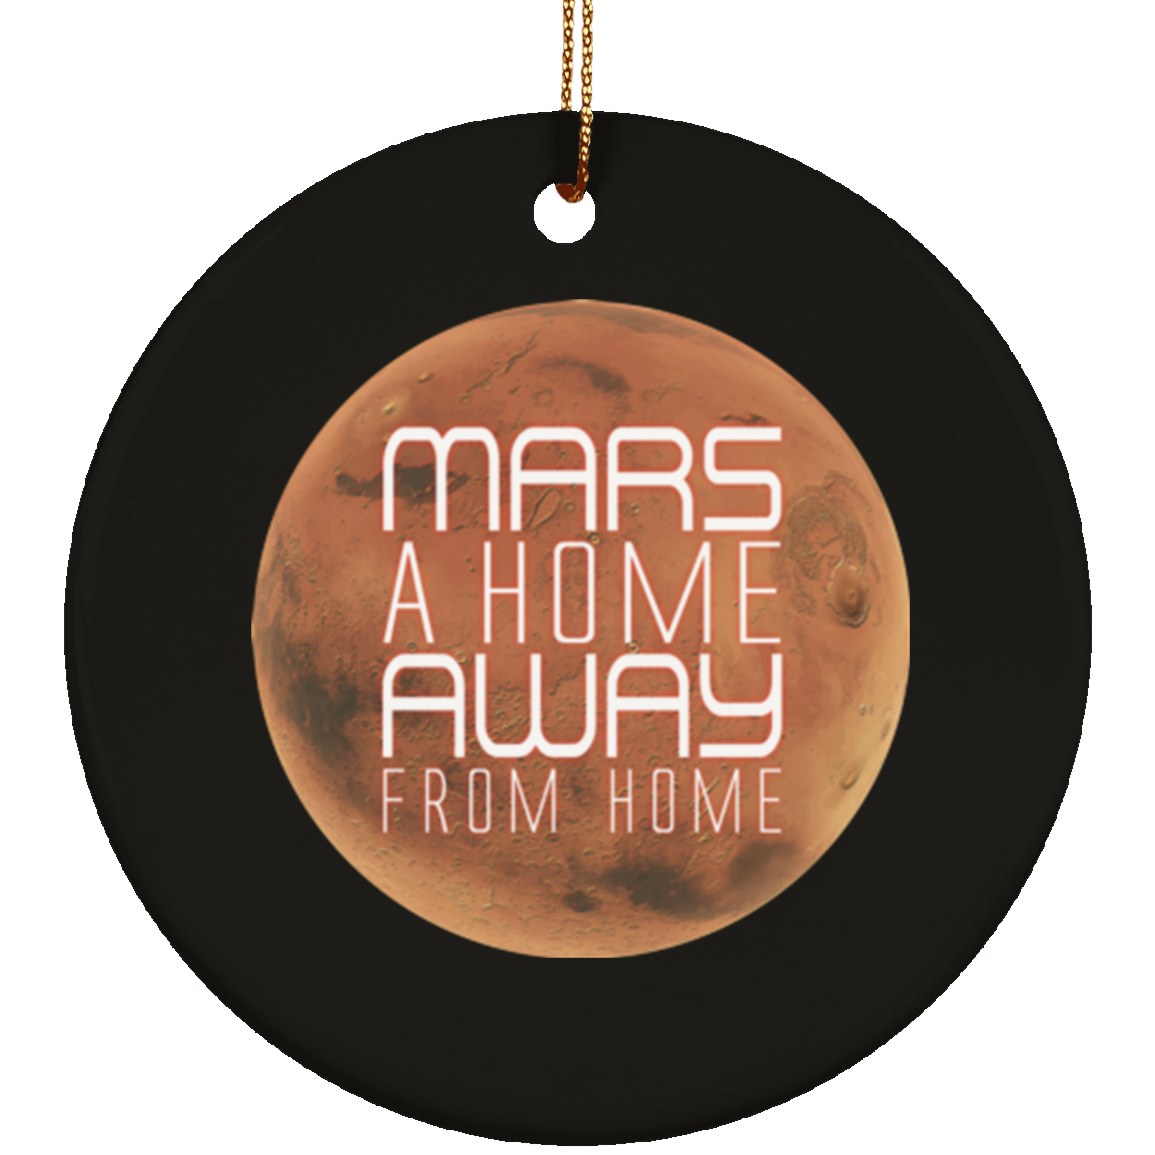 Christmas Tree Decorations - Mars Ornament - GoneBold.gift